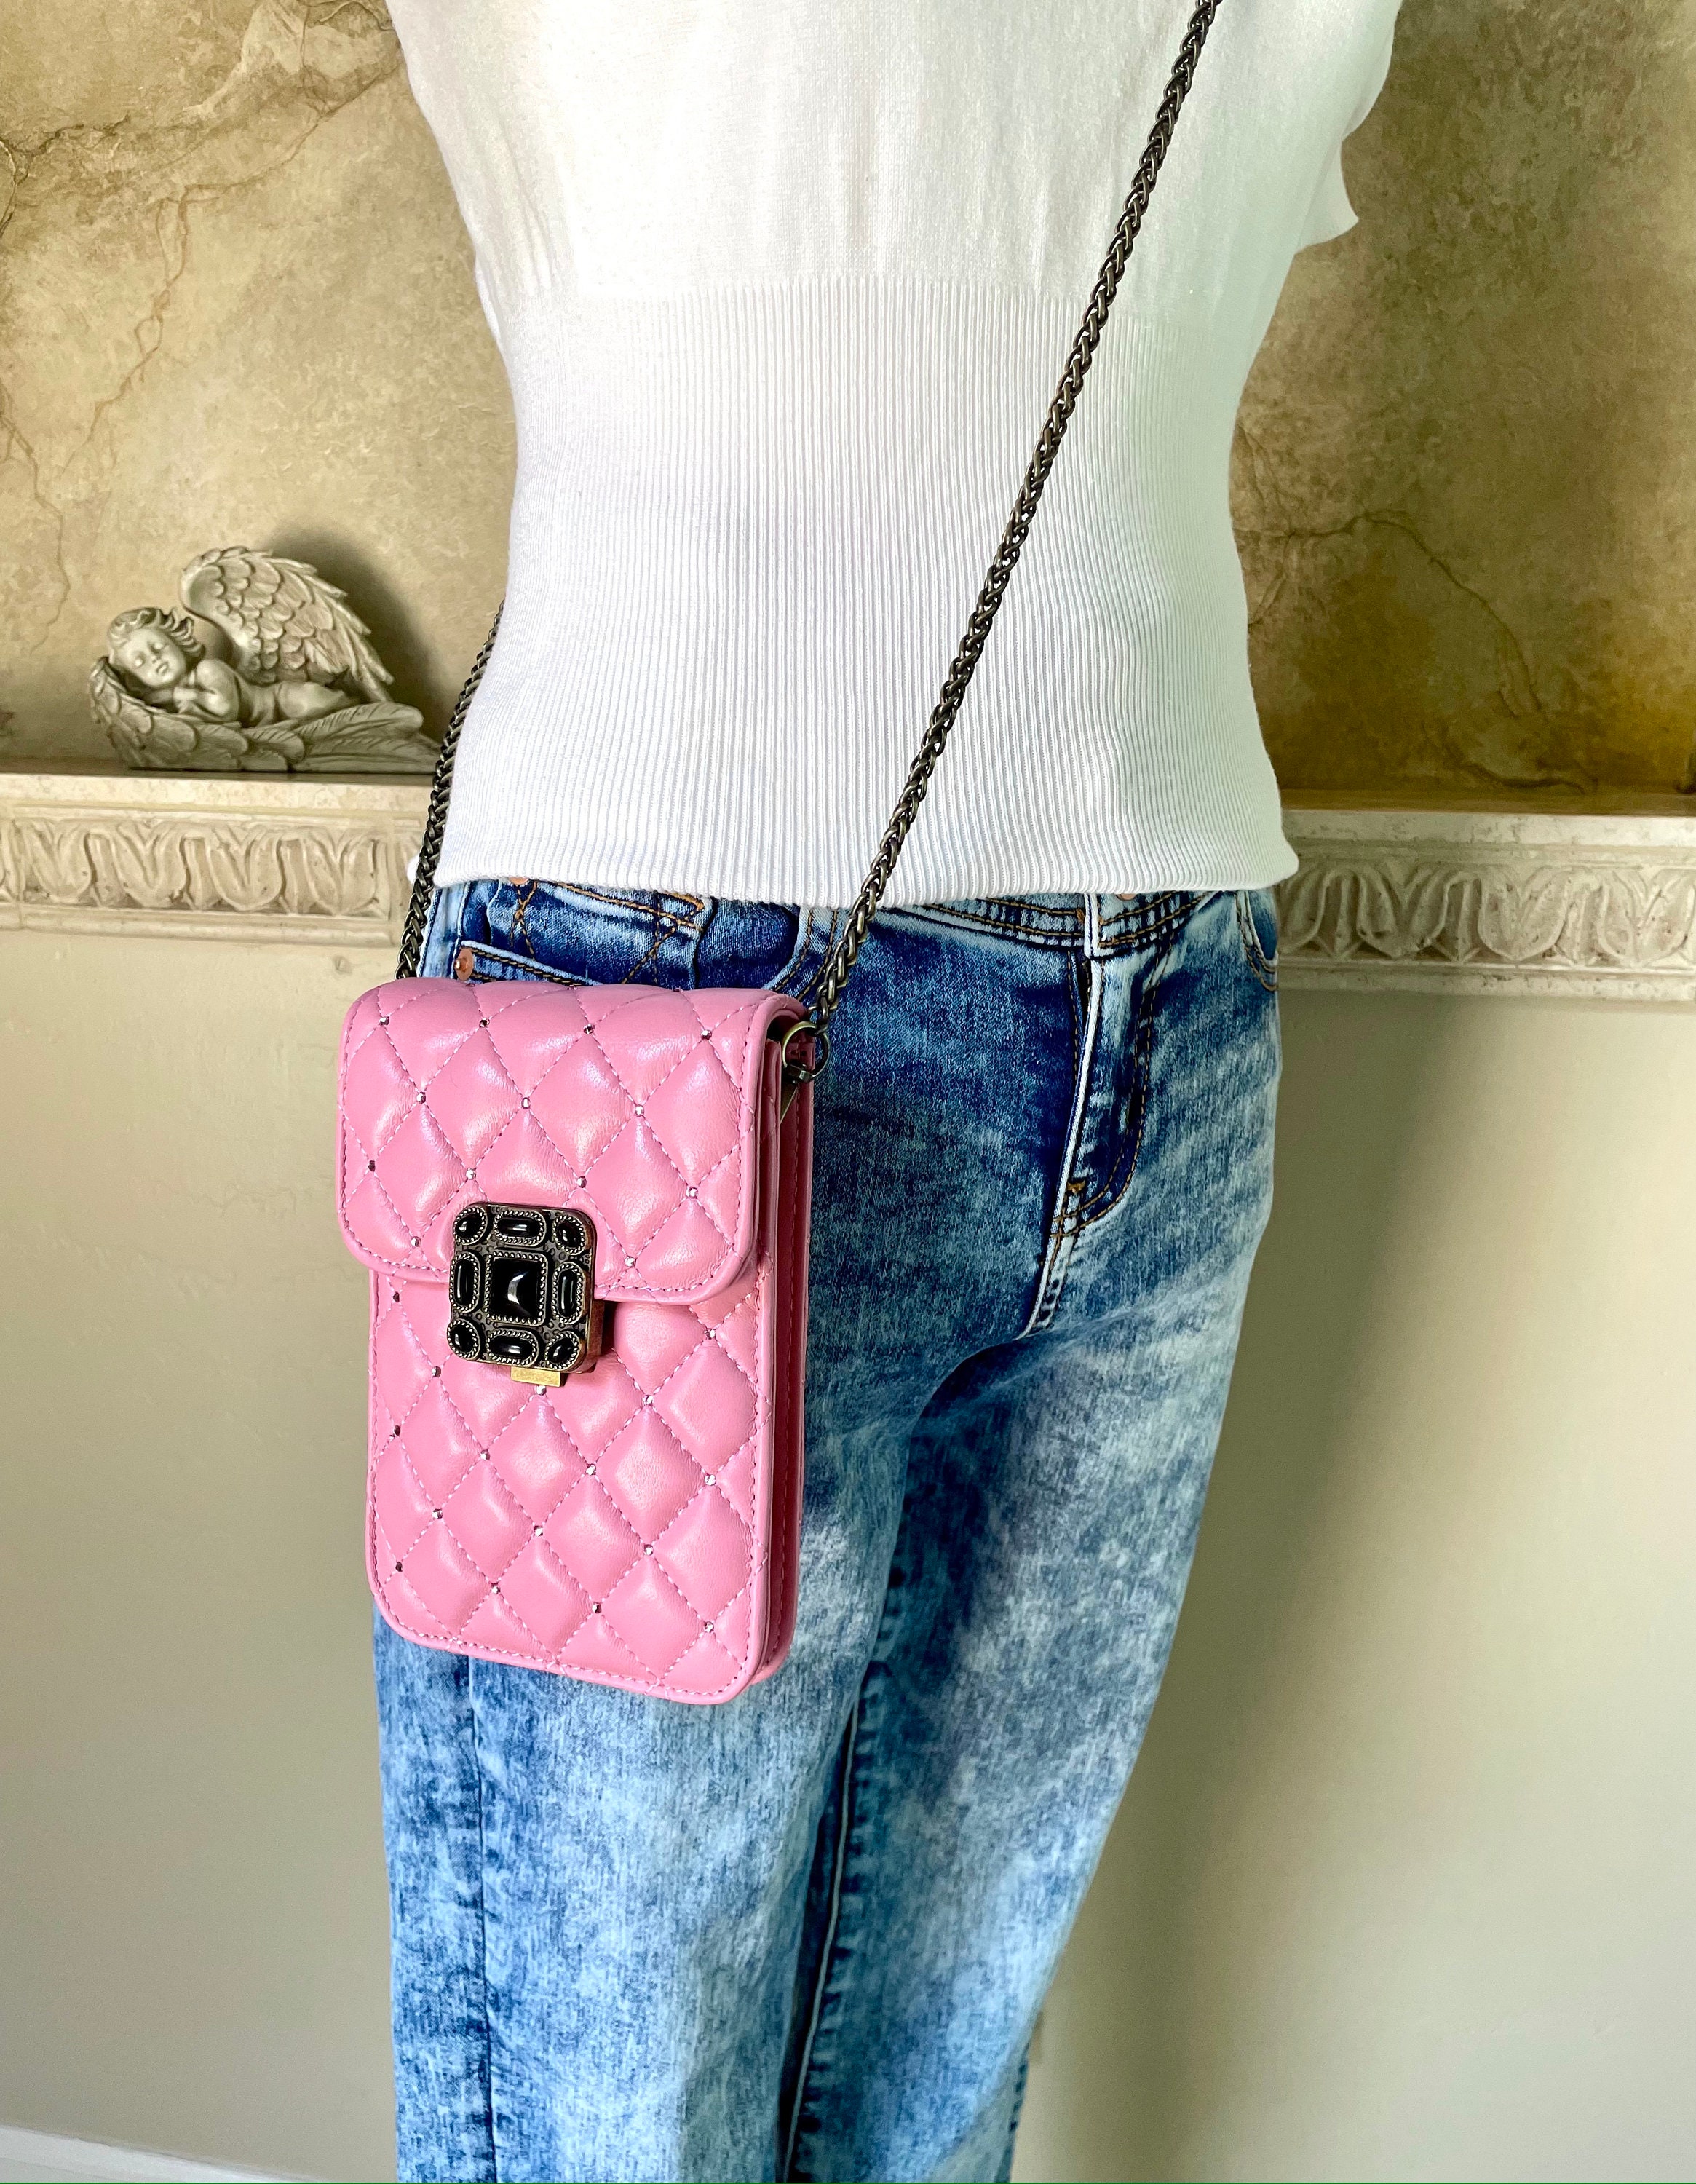 Beautiful Elegant Quilted Crossbody Clutch Handbag Purse Bag Phone Case Made with or Without Swarovski Crystals & Long Strap